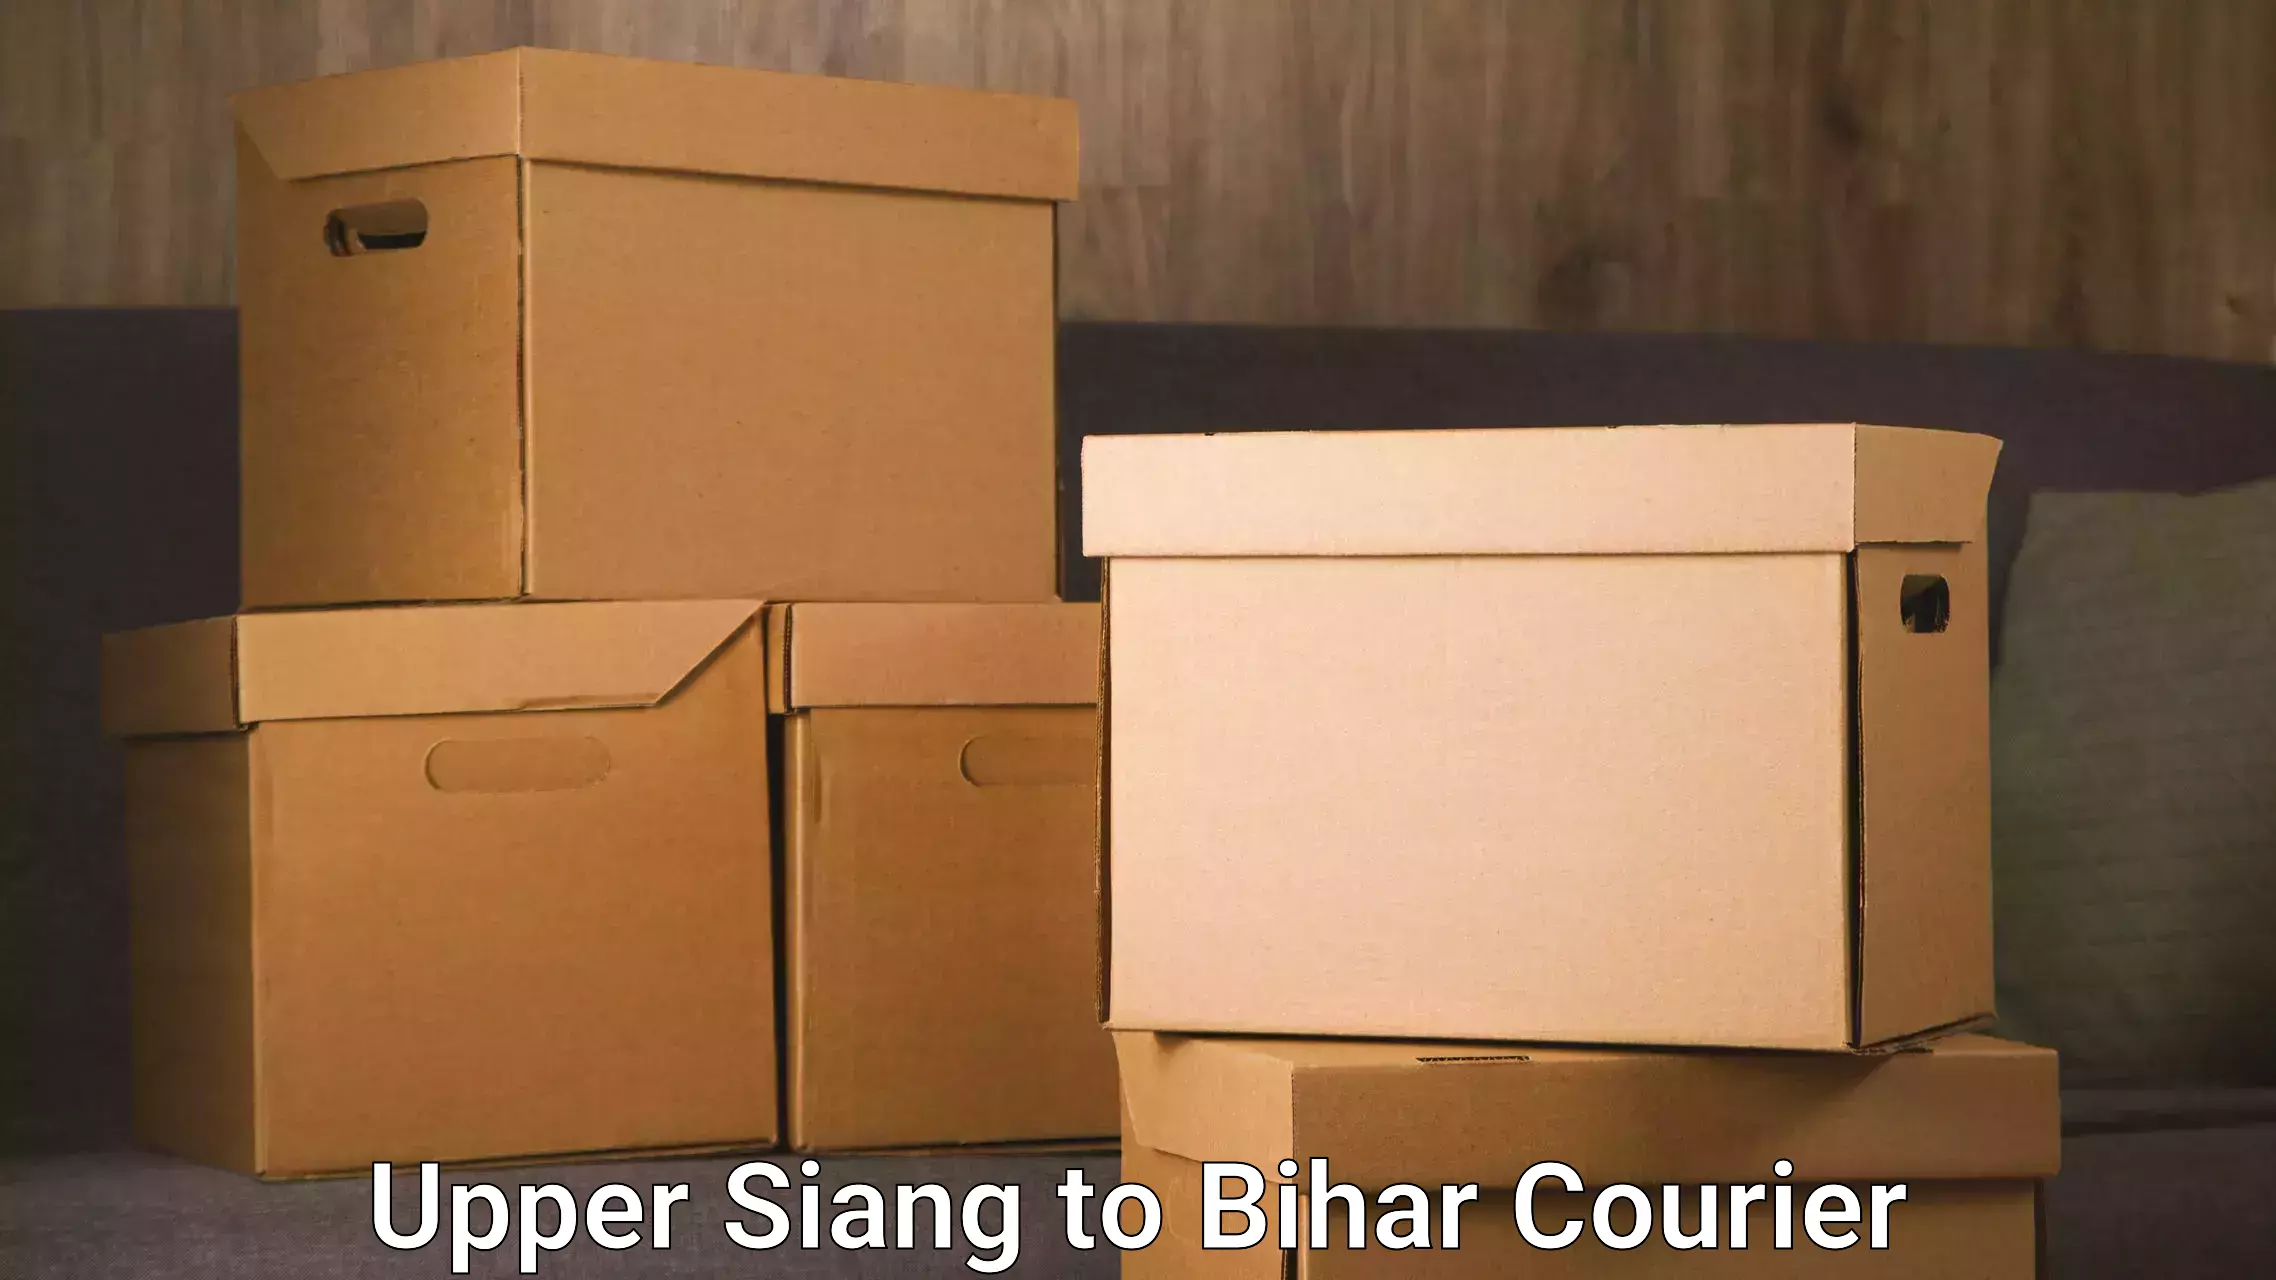 Courier service partnerships Upper Siang to Bhojpur